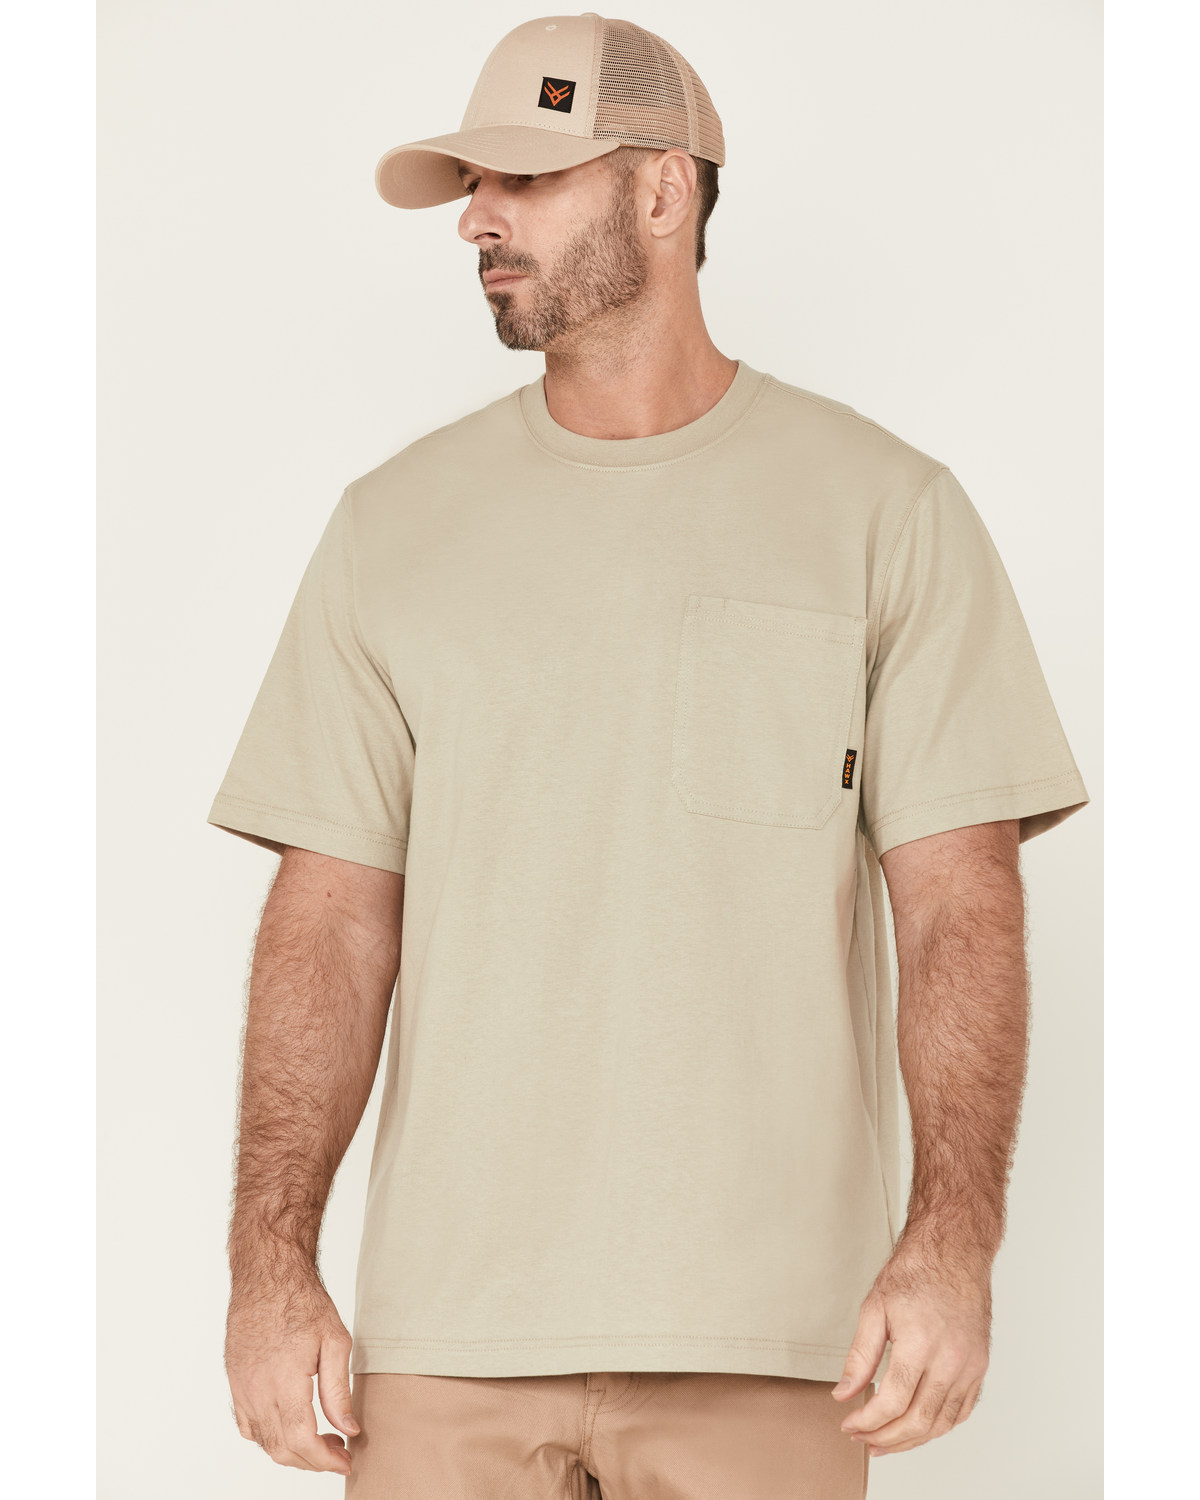 Hawx Men's Solid Taupe Force Heavyweight Short Sleeve Work Pocket T-Shirt